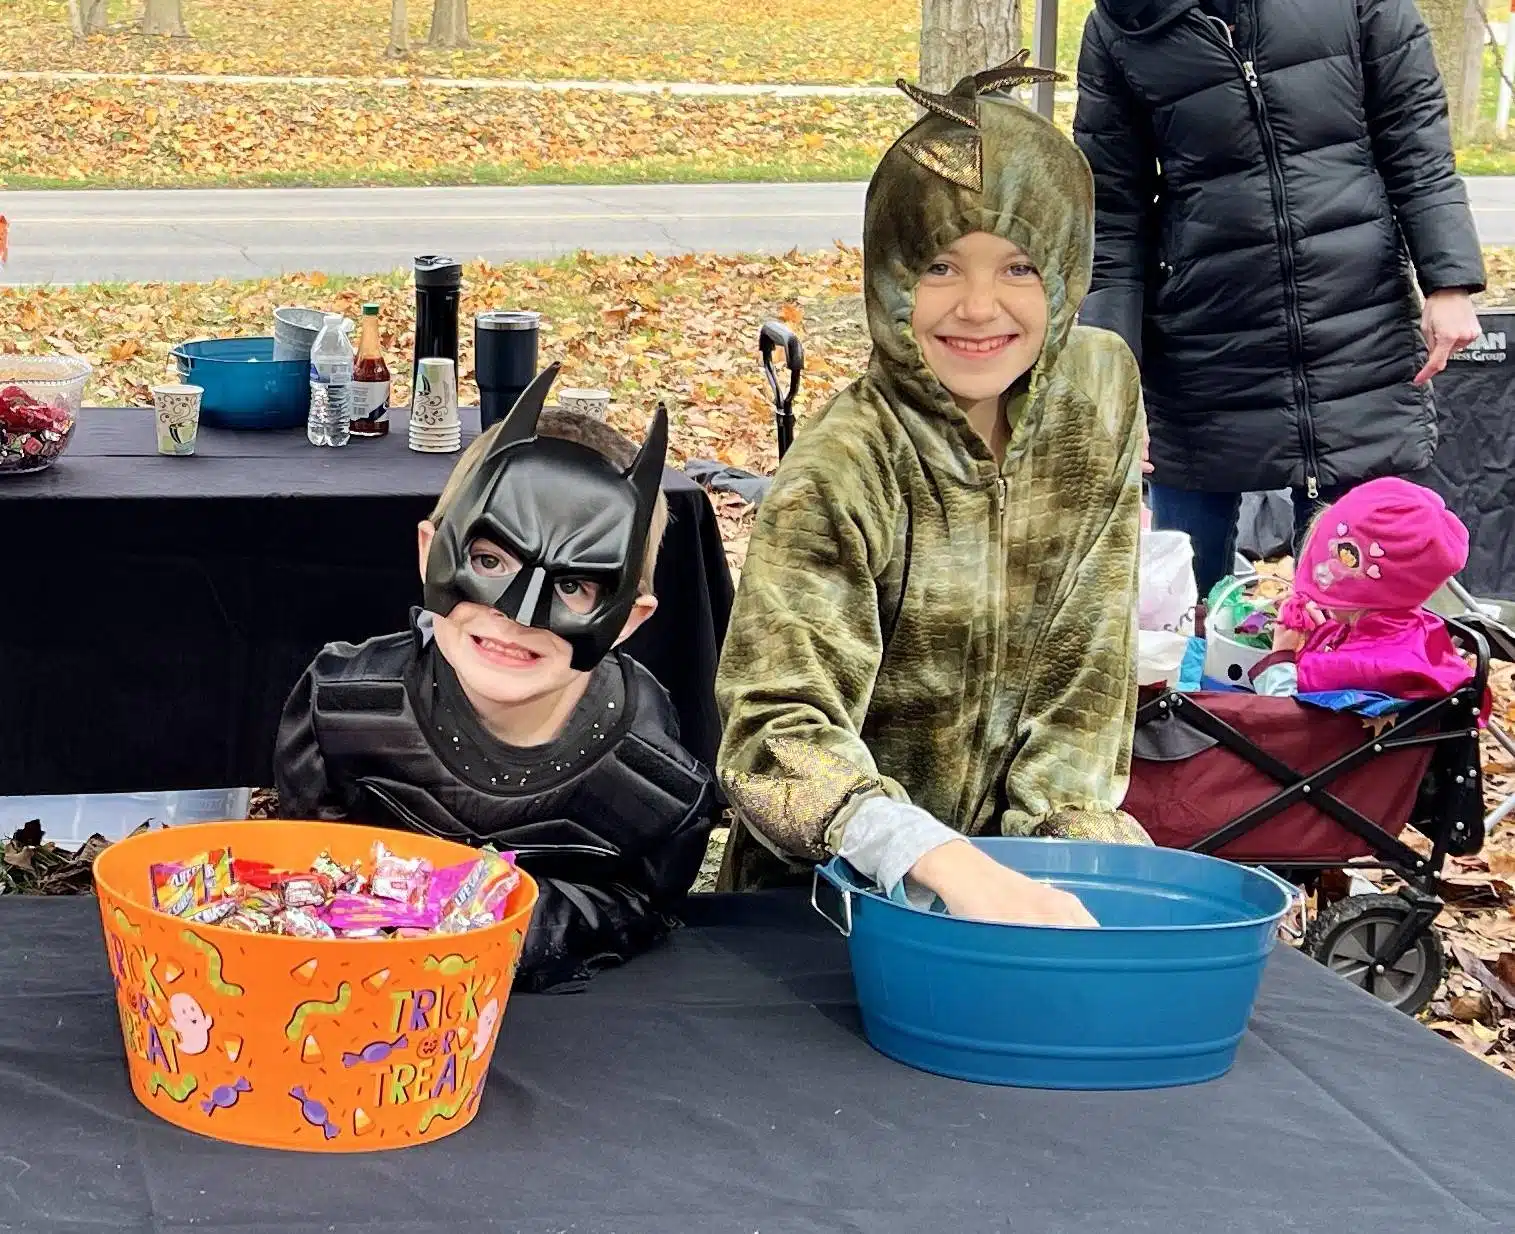 WCC Participates in Trick or Treat on the Trail — Warsaw Community Church